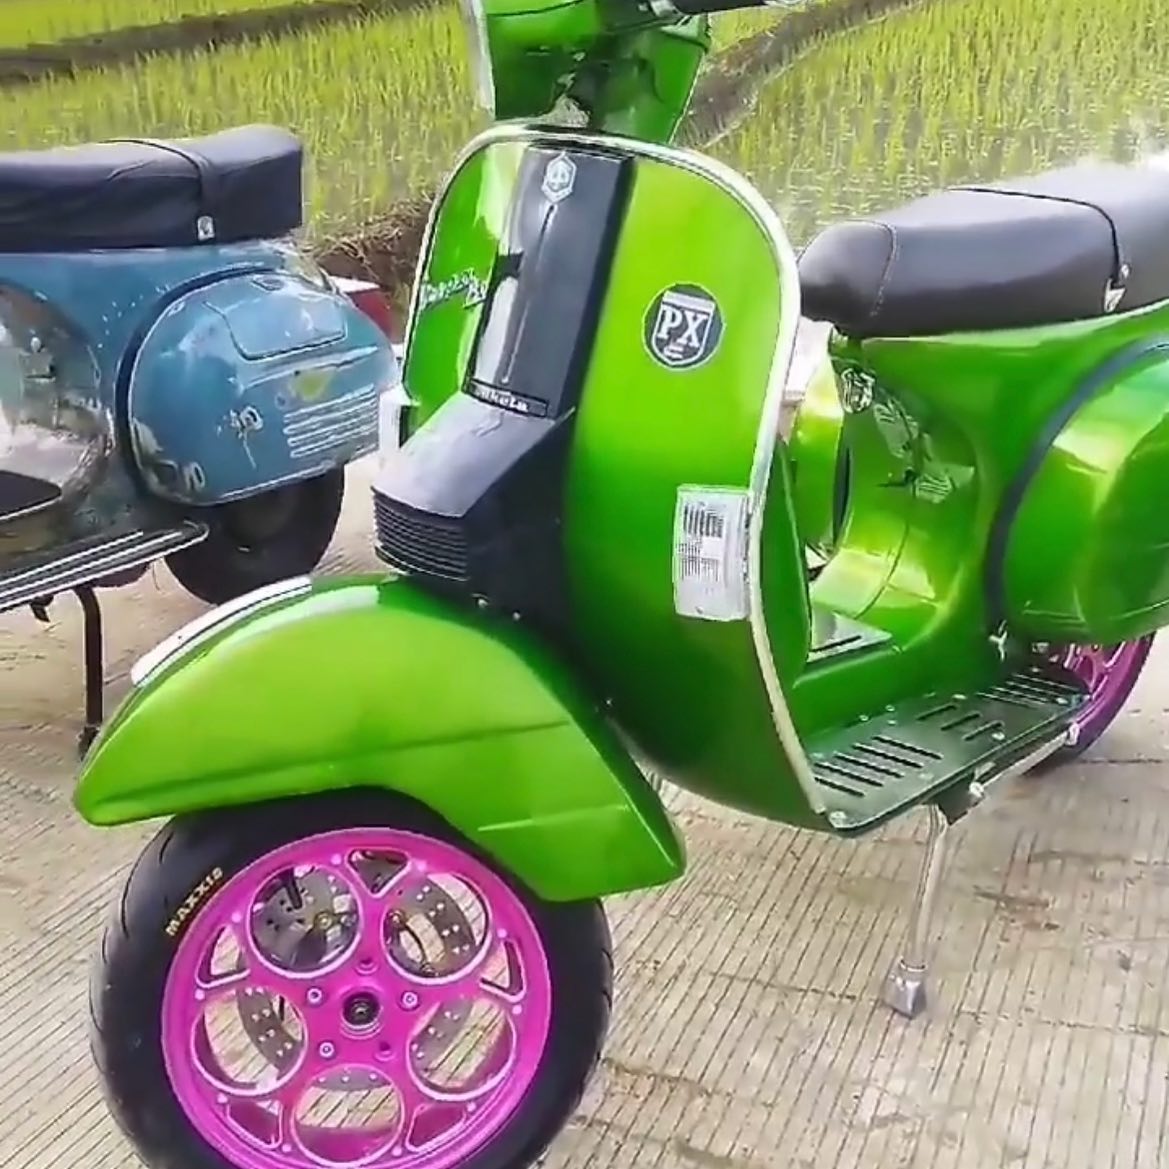 Joker green Vespa PX custom modified with purple wheels

hashtag and mention @vespapxnet for feature repost Check website www.vespapx.net for more 

@firmanfirman277